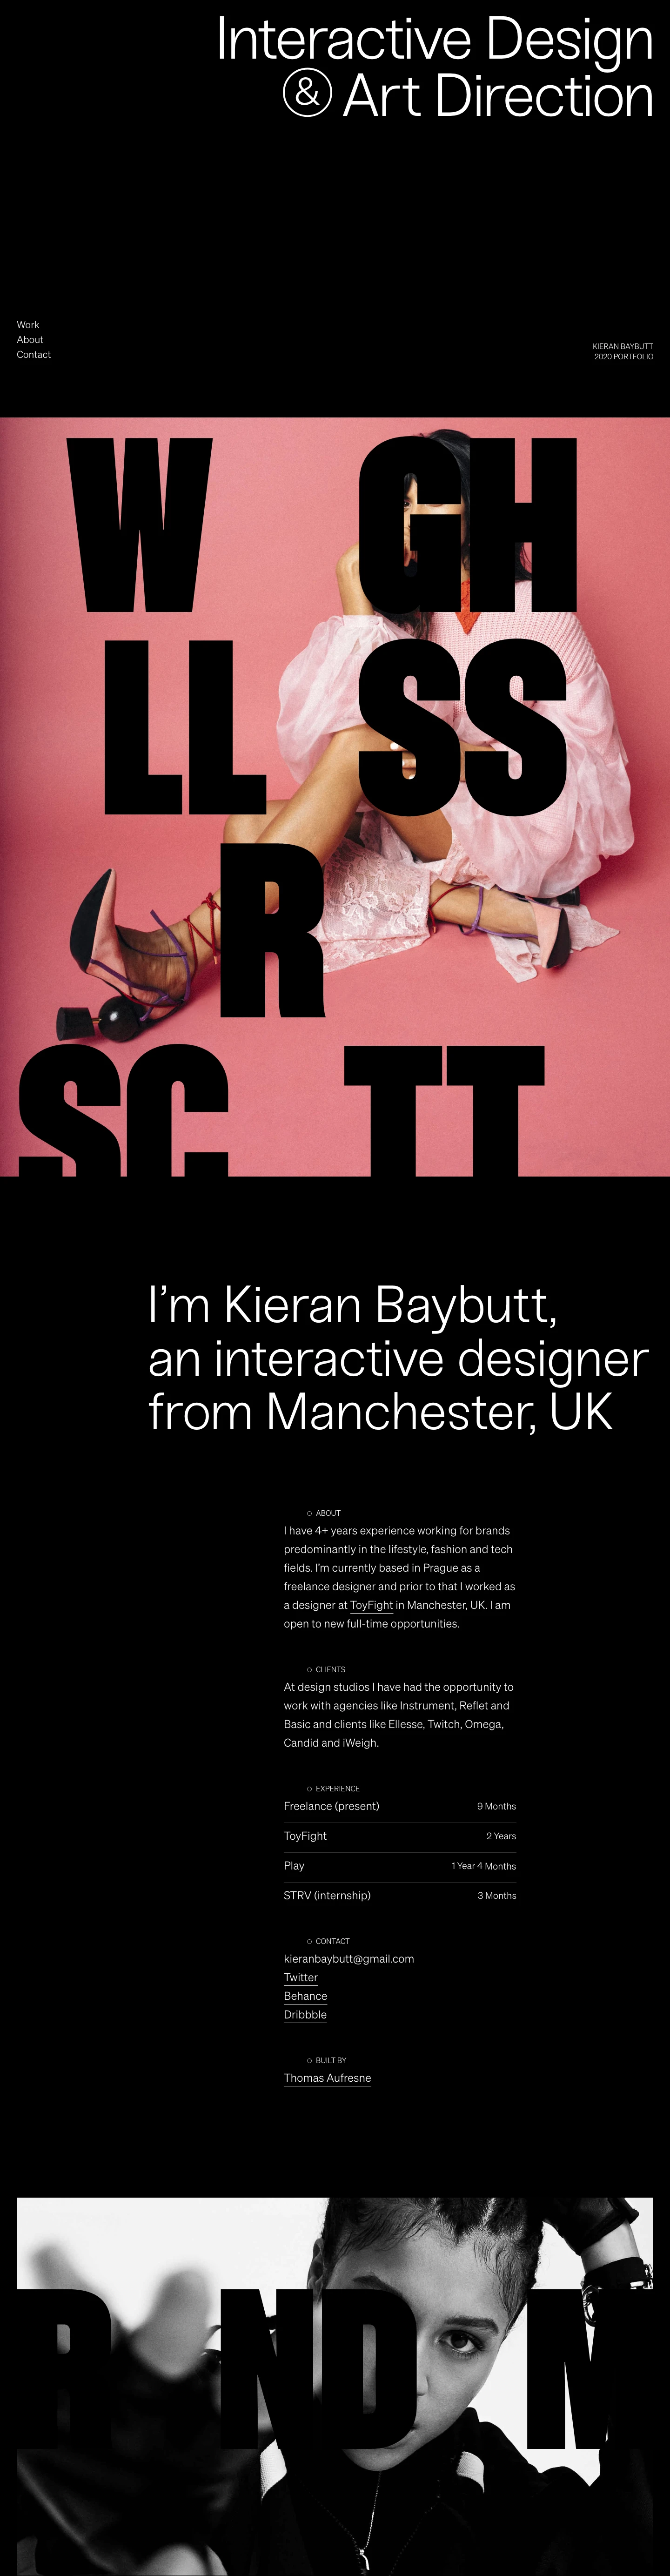 Kieran Baybutt Landing Page Example: I’m Kieran Baybutt, an interactive designer from Manchester, UK. I have 4+ years experience and I'm currently based in Prague.